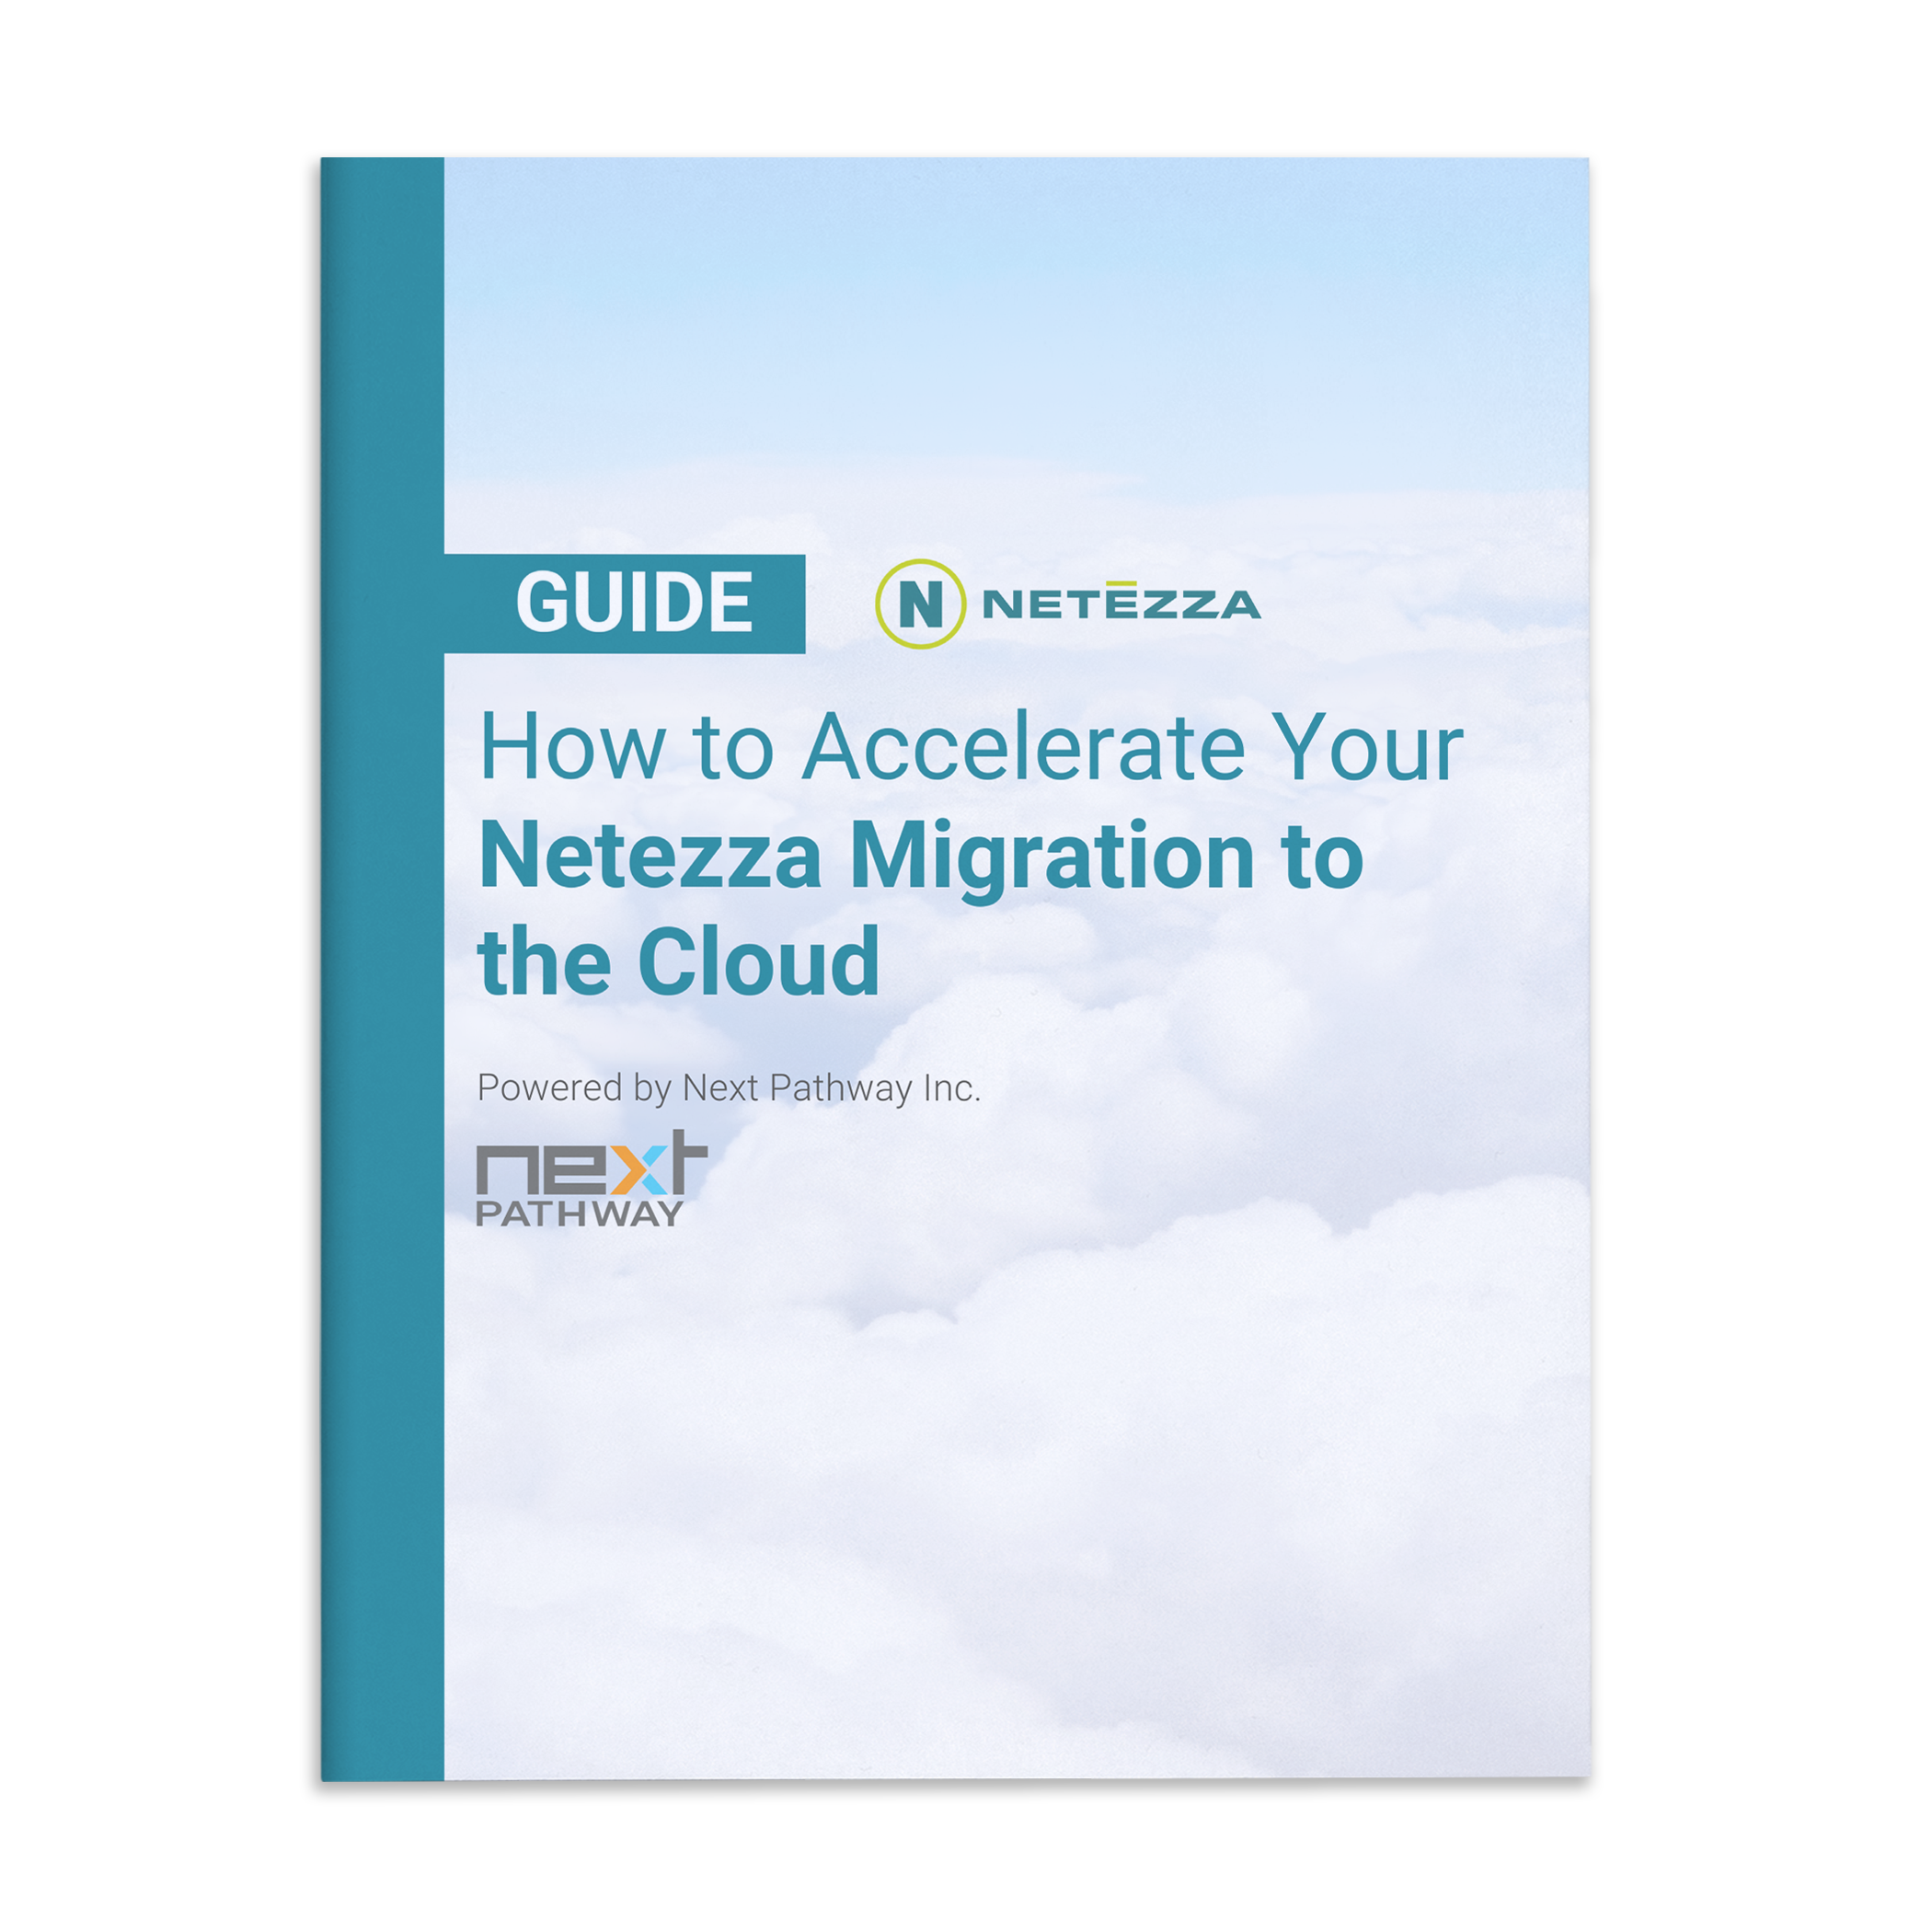 How to Accelerate Your Netezza Migration